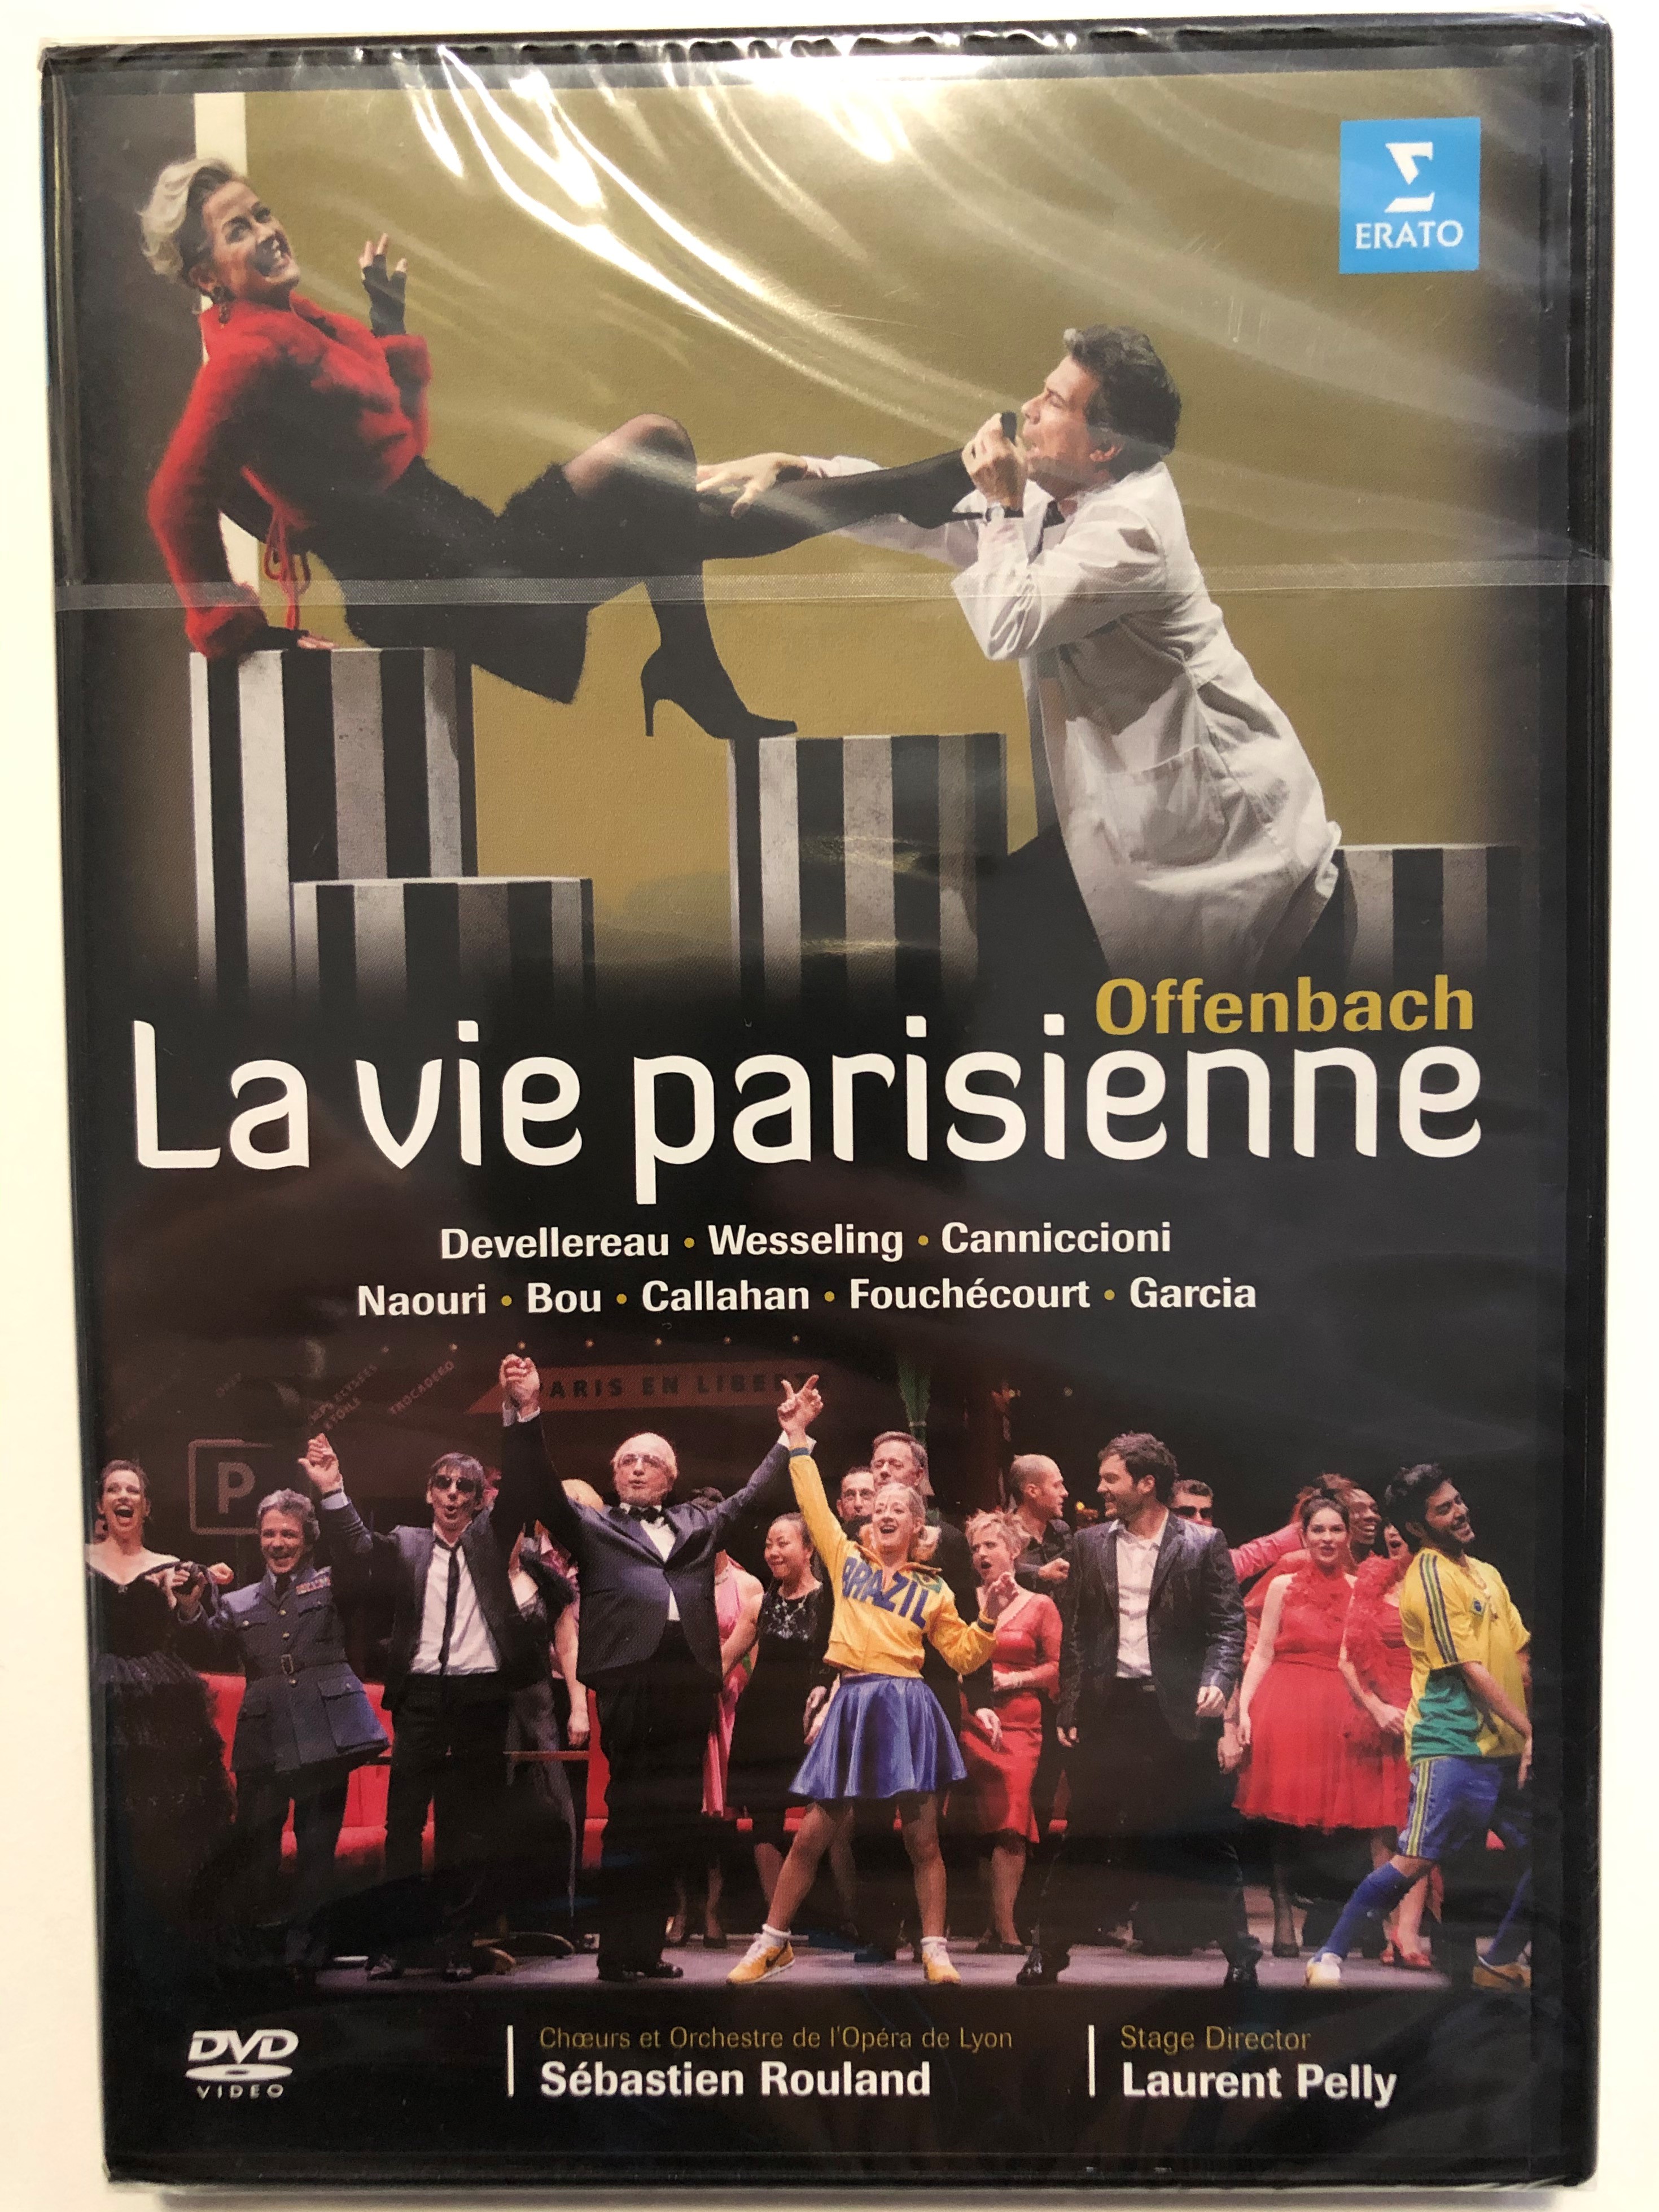 Offenbach: La vie parisienne DVD 2007 Recorded live at Opera national de  Lyon / Directed by Francois Roussillon / Stage Director Laurent Pelly /  Opera-bouffe in 4 acts / Actors: Jean-Sebastien Bou,